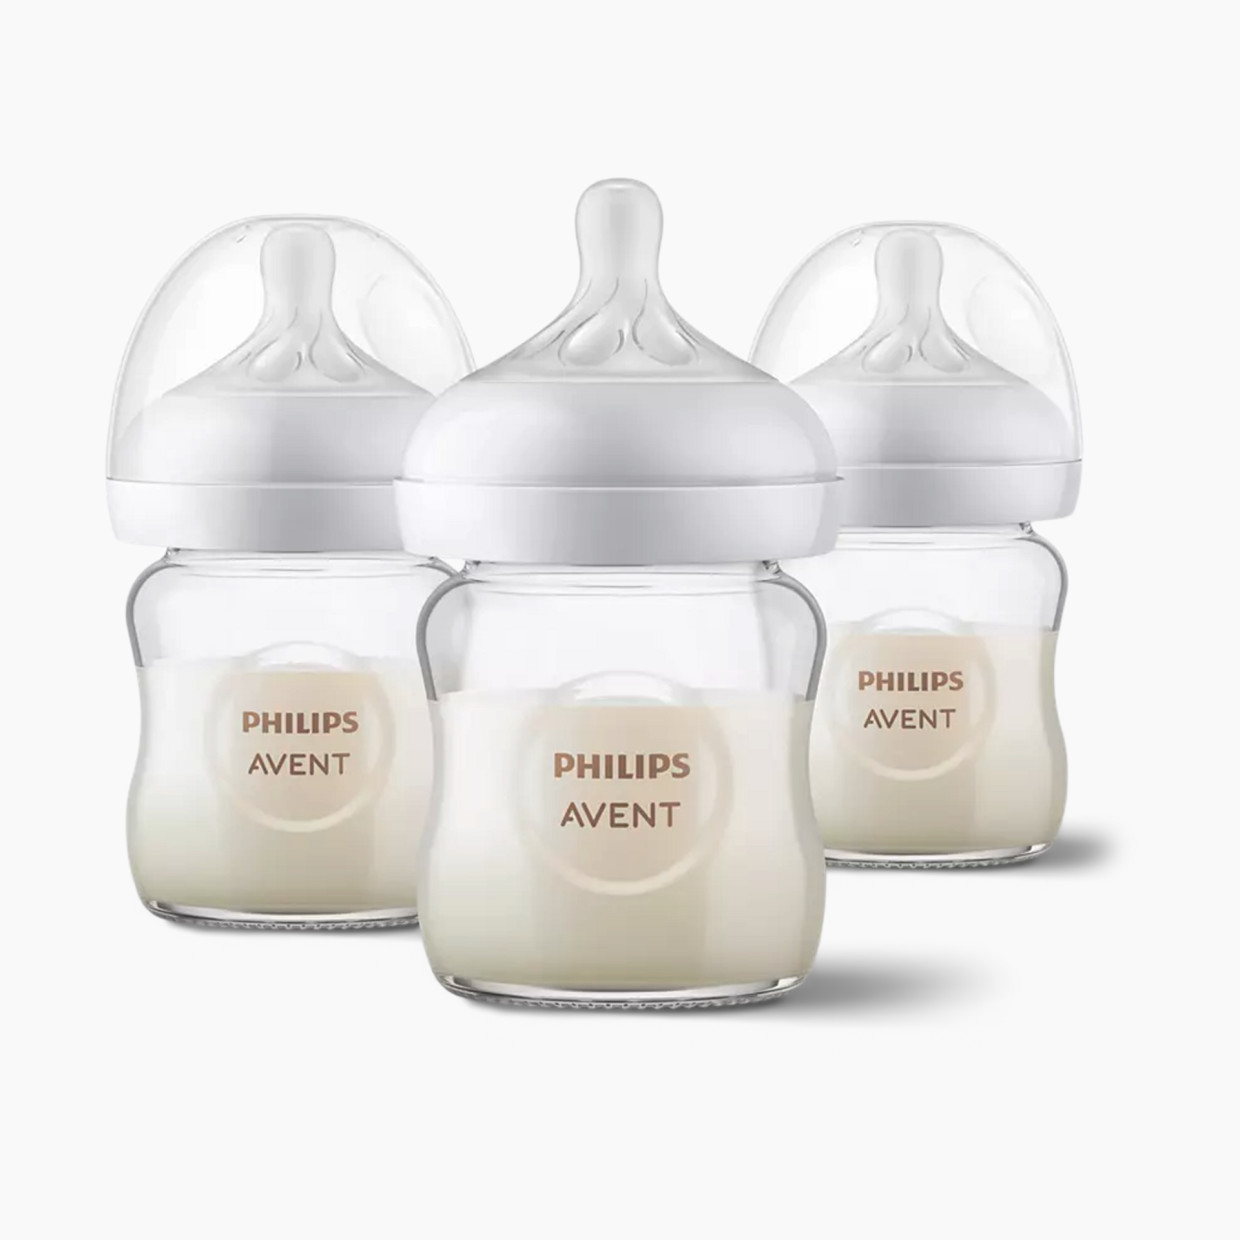 Philips Avent Avent Glass Natural Baby Bottle With Natural Response Nipple - Clear, 4 Oz, 3.